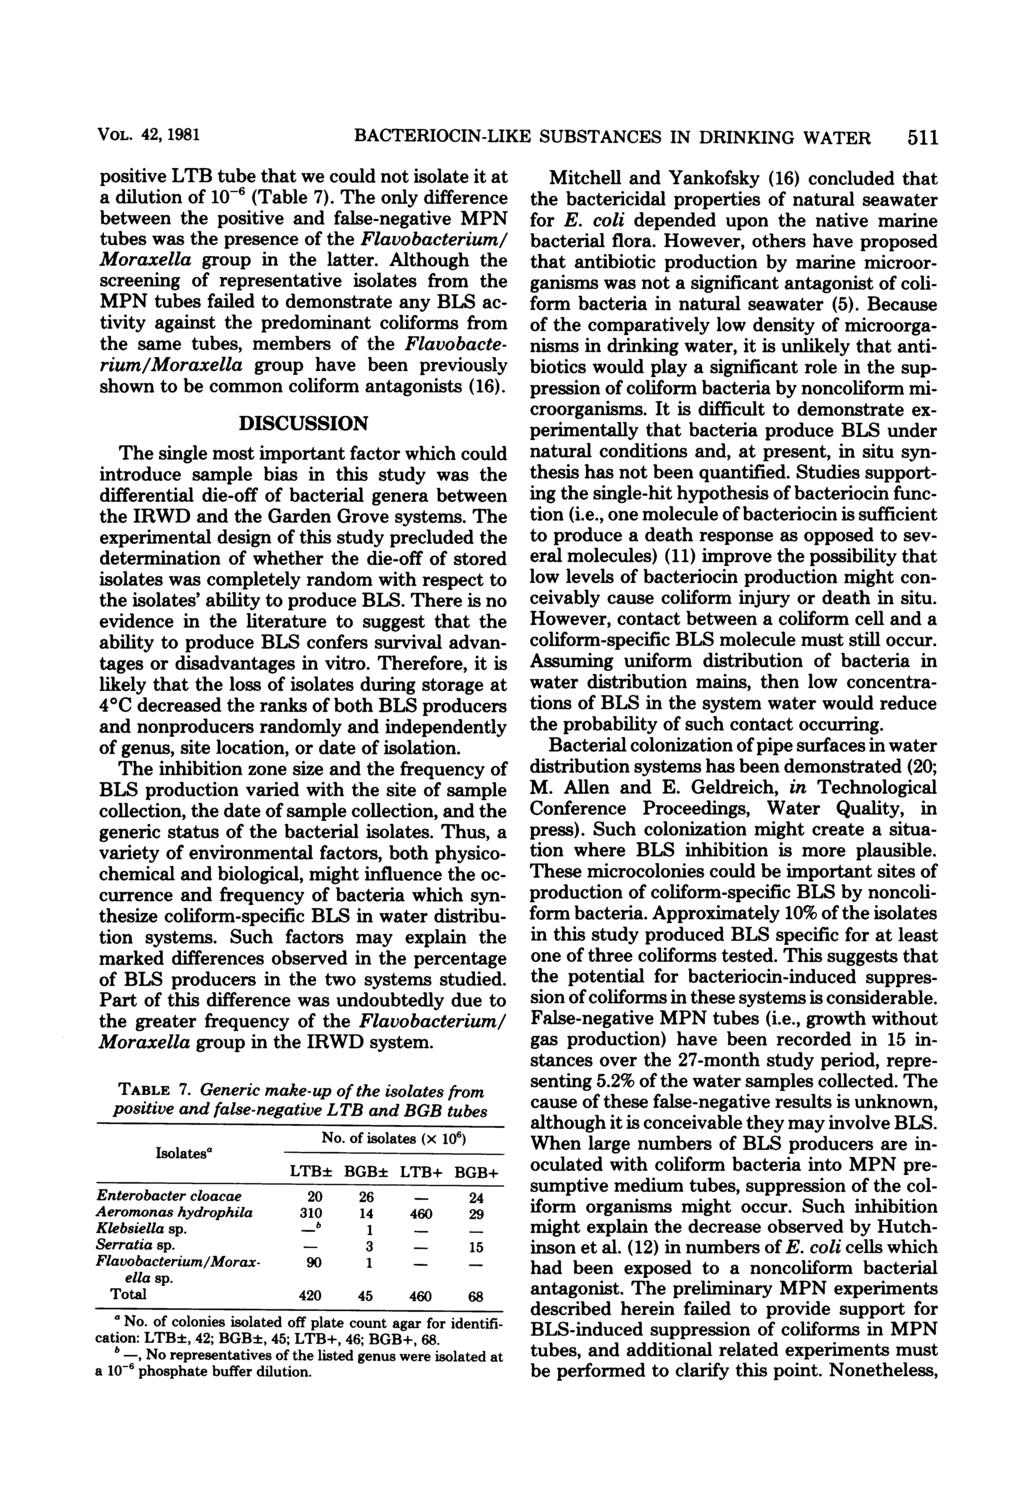 VOL. 42, 1981 positive LTB tube that we could not isolate it at a dilution of 10-6 (Table 7).